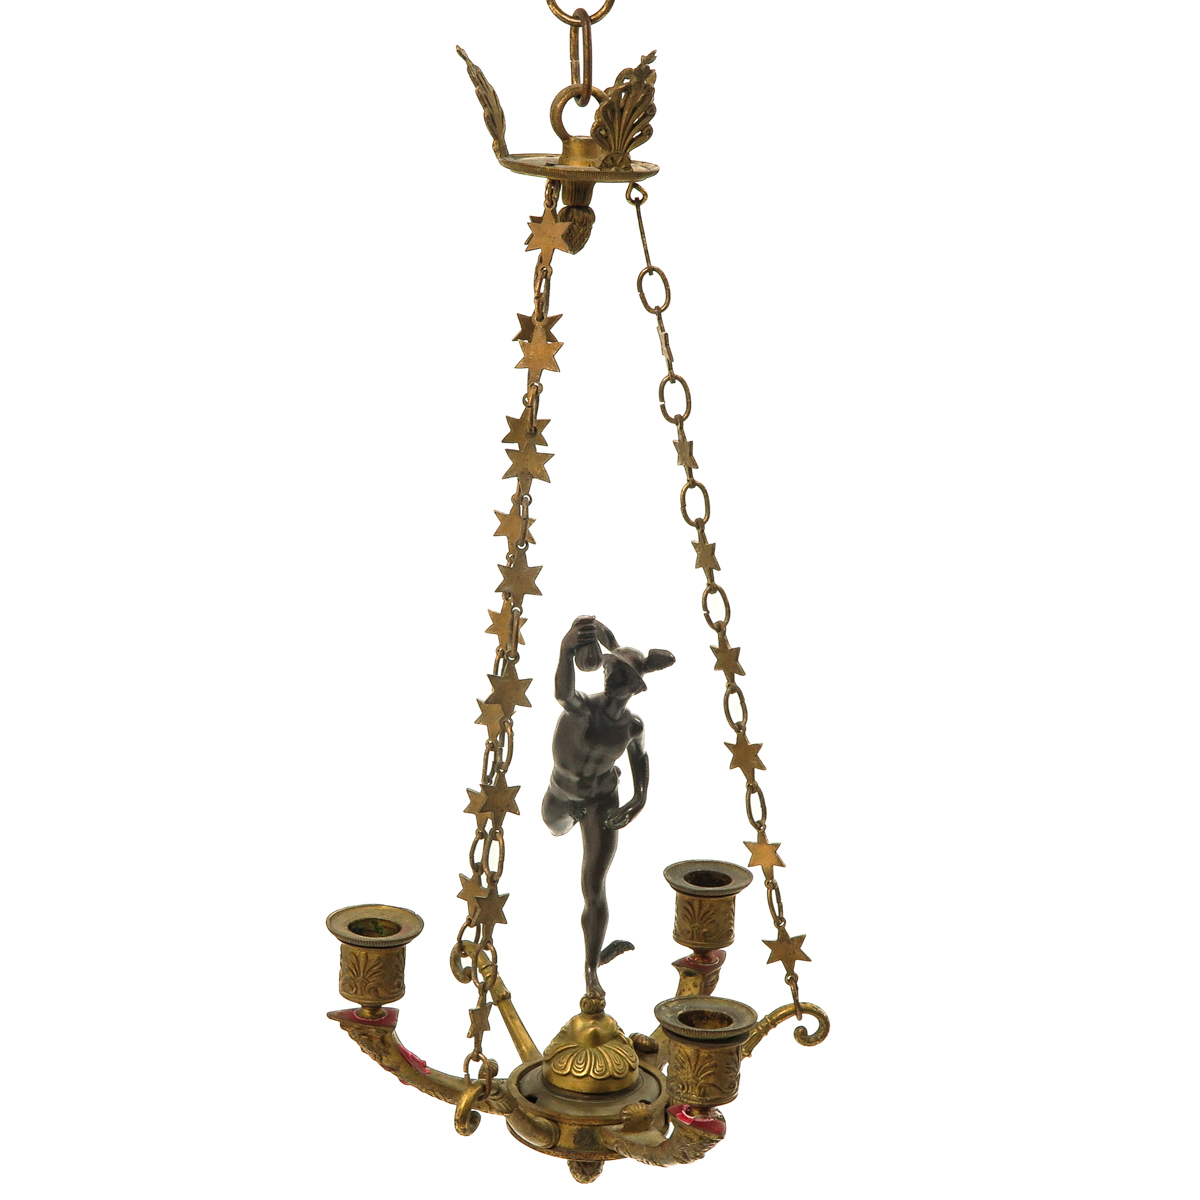 A 19th Century Bronze Chandelier - Image 2 of 6